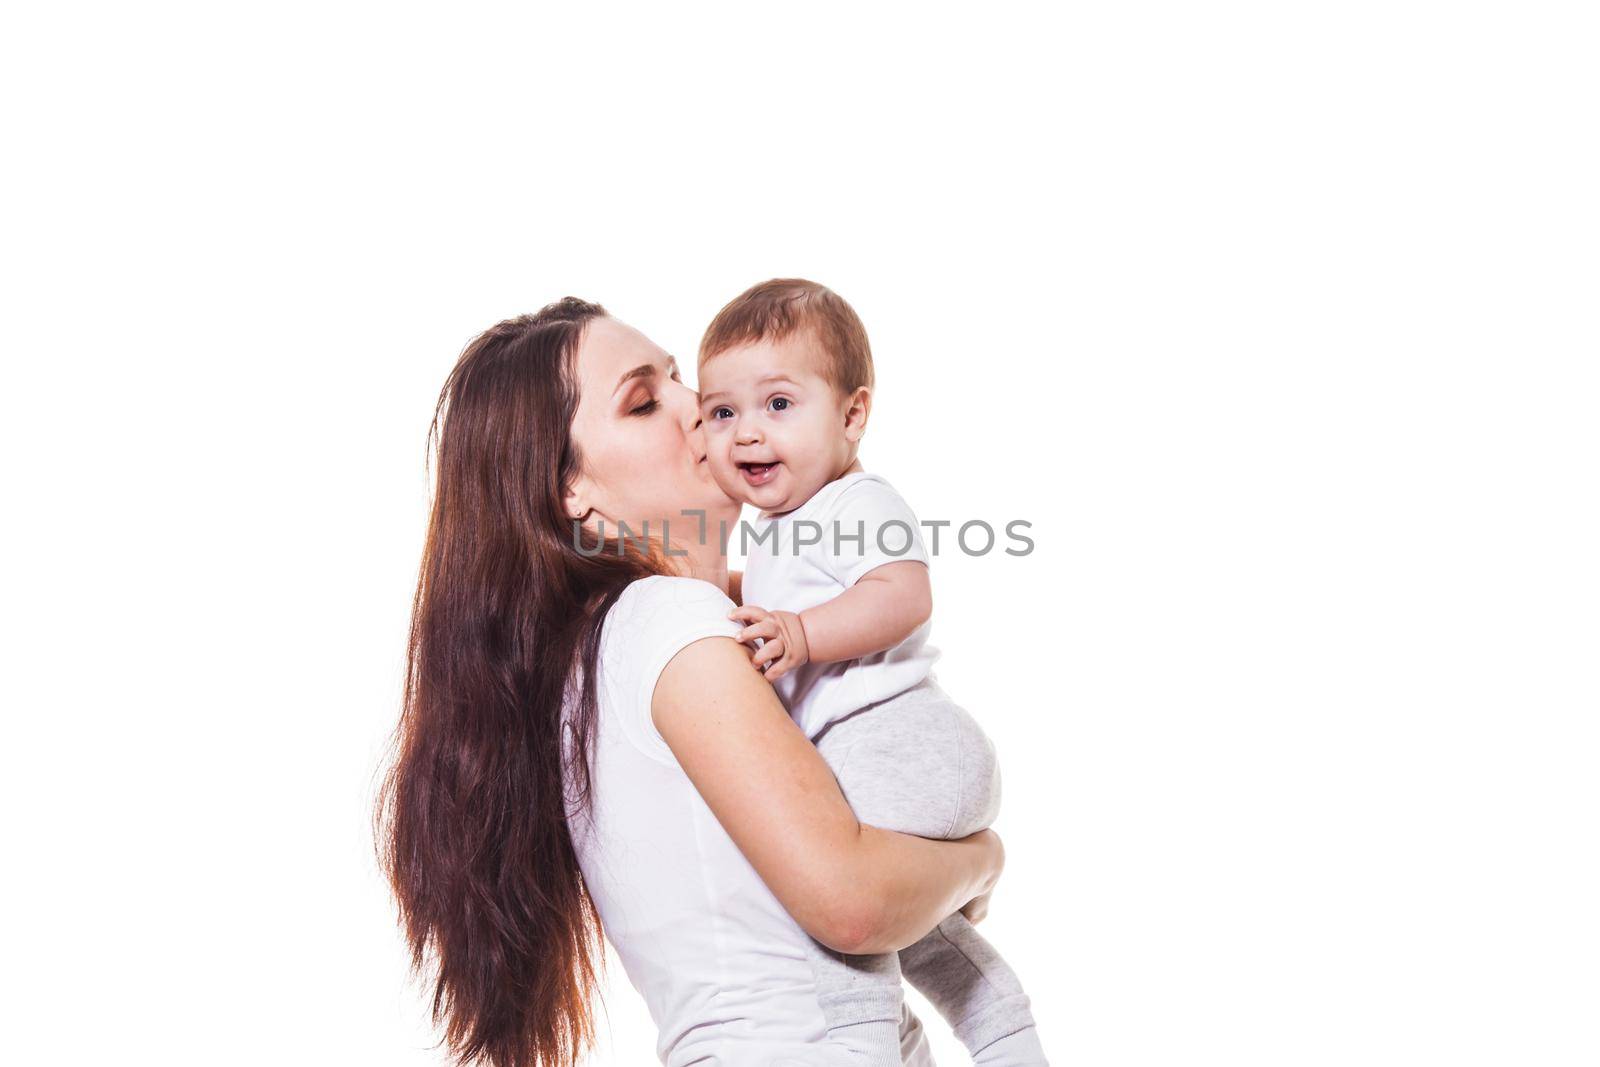 Beautiful young mother holds her child in her arms and kisses her baby, wearing white cloths, on a white background